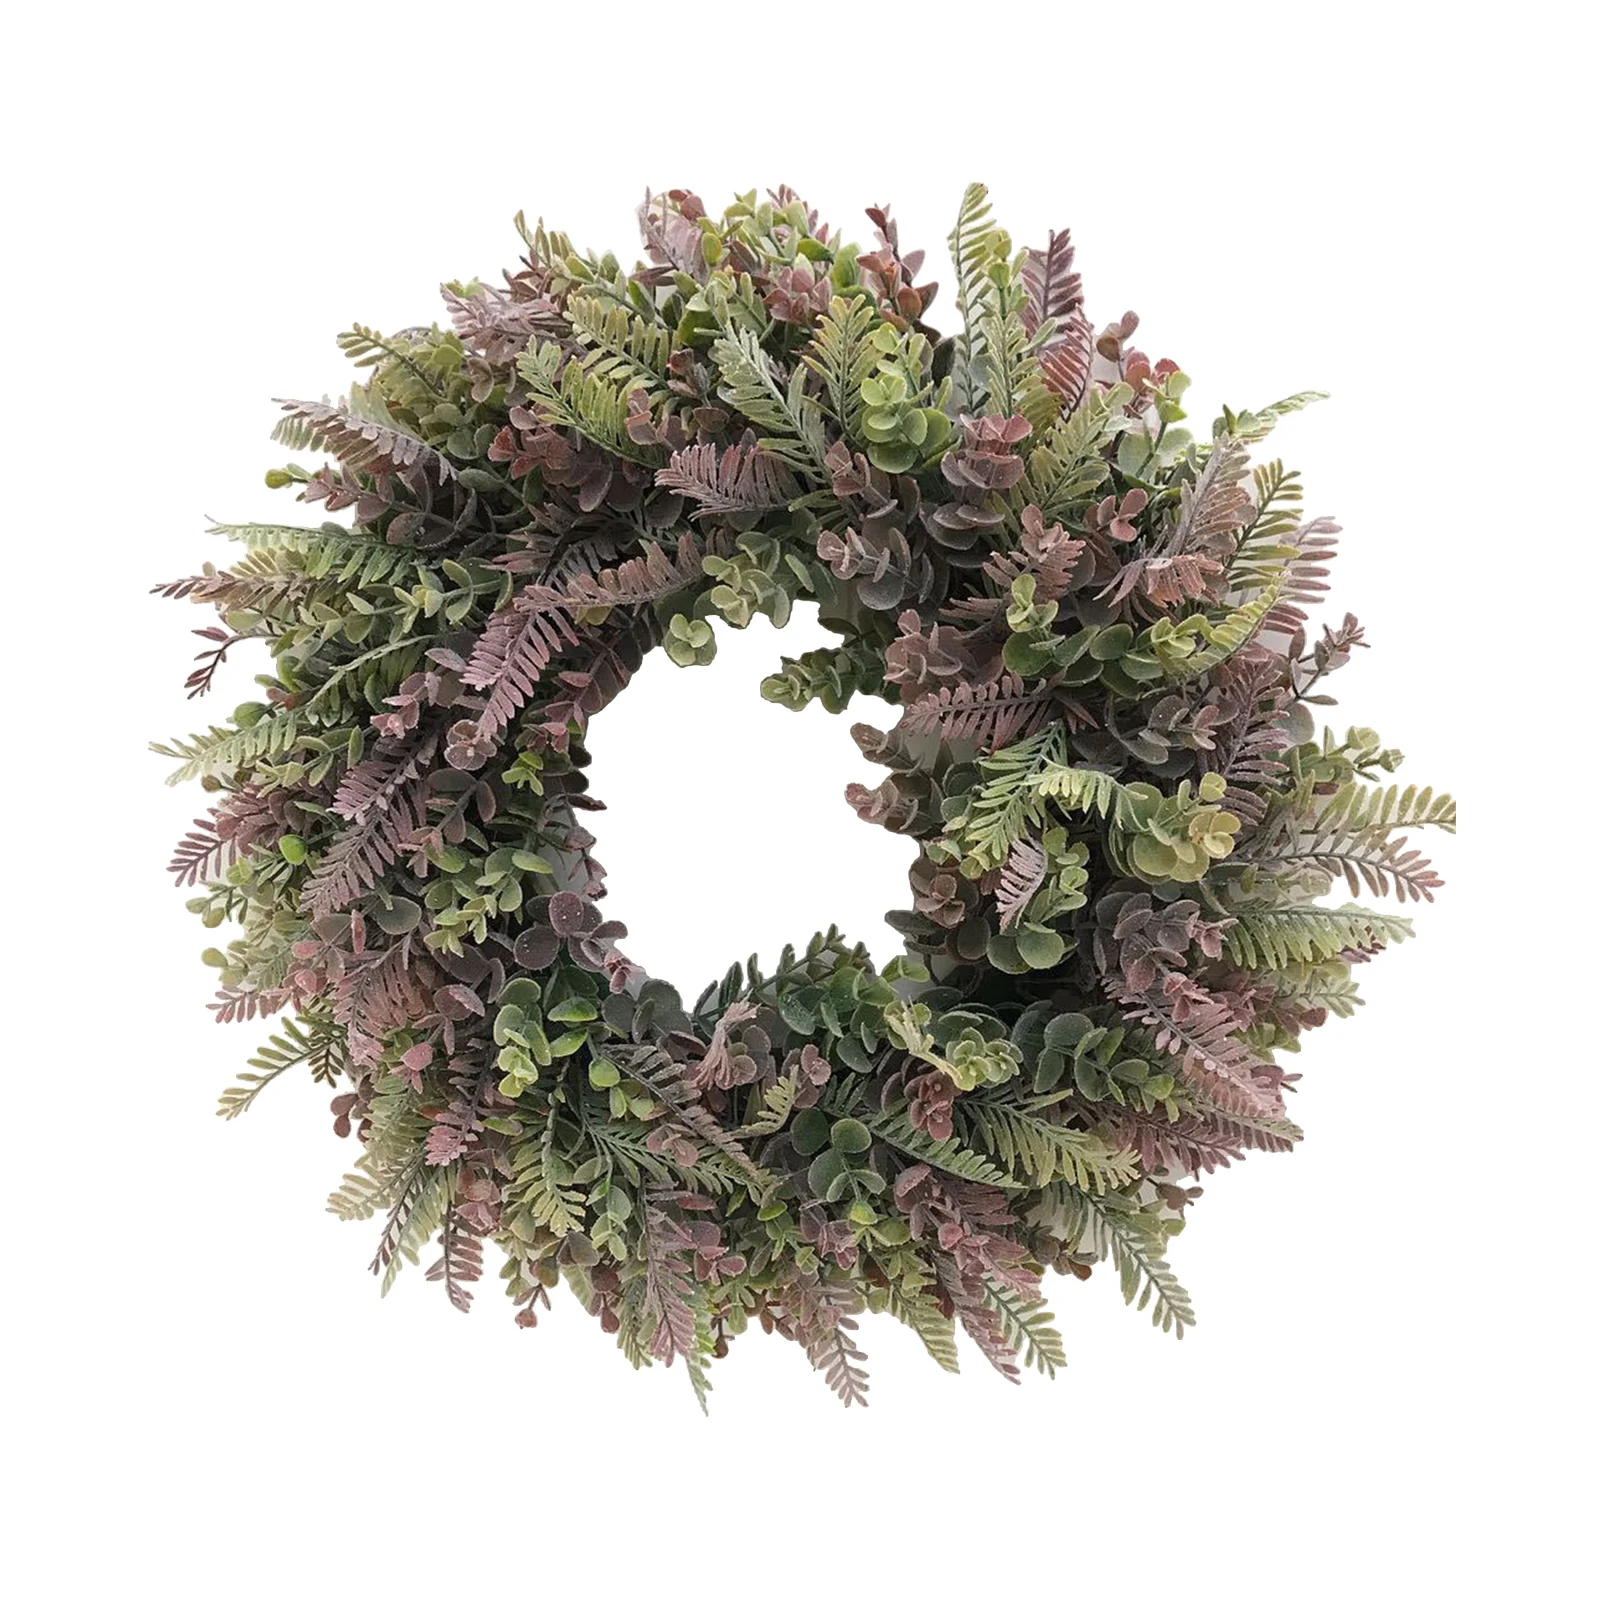 18'' Artificial Eucalyptus Wreaths, Fake Front Door Wreath with Green Leaves Summer Garland for Wall Home Decor Indoor Outdoor